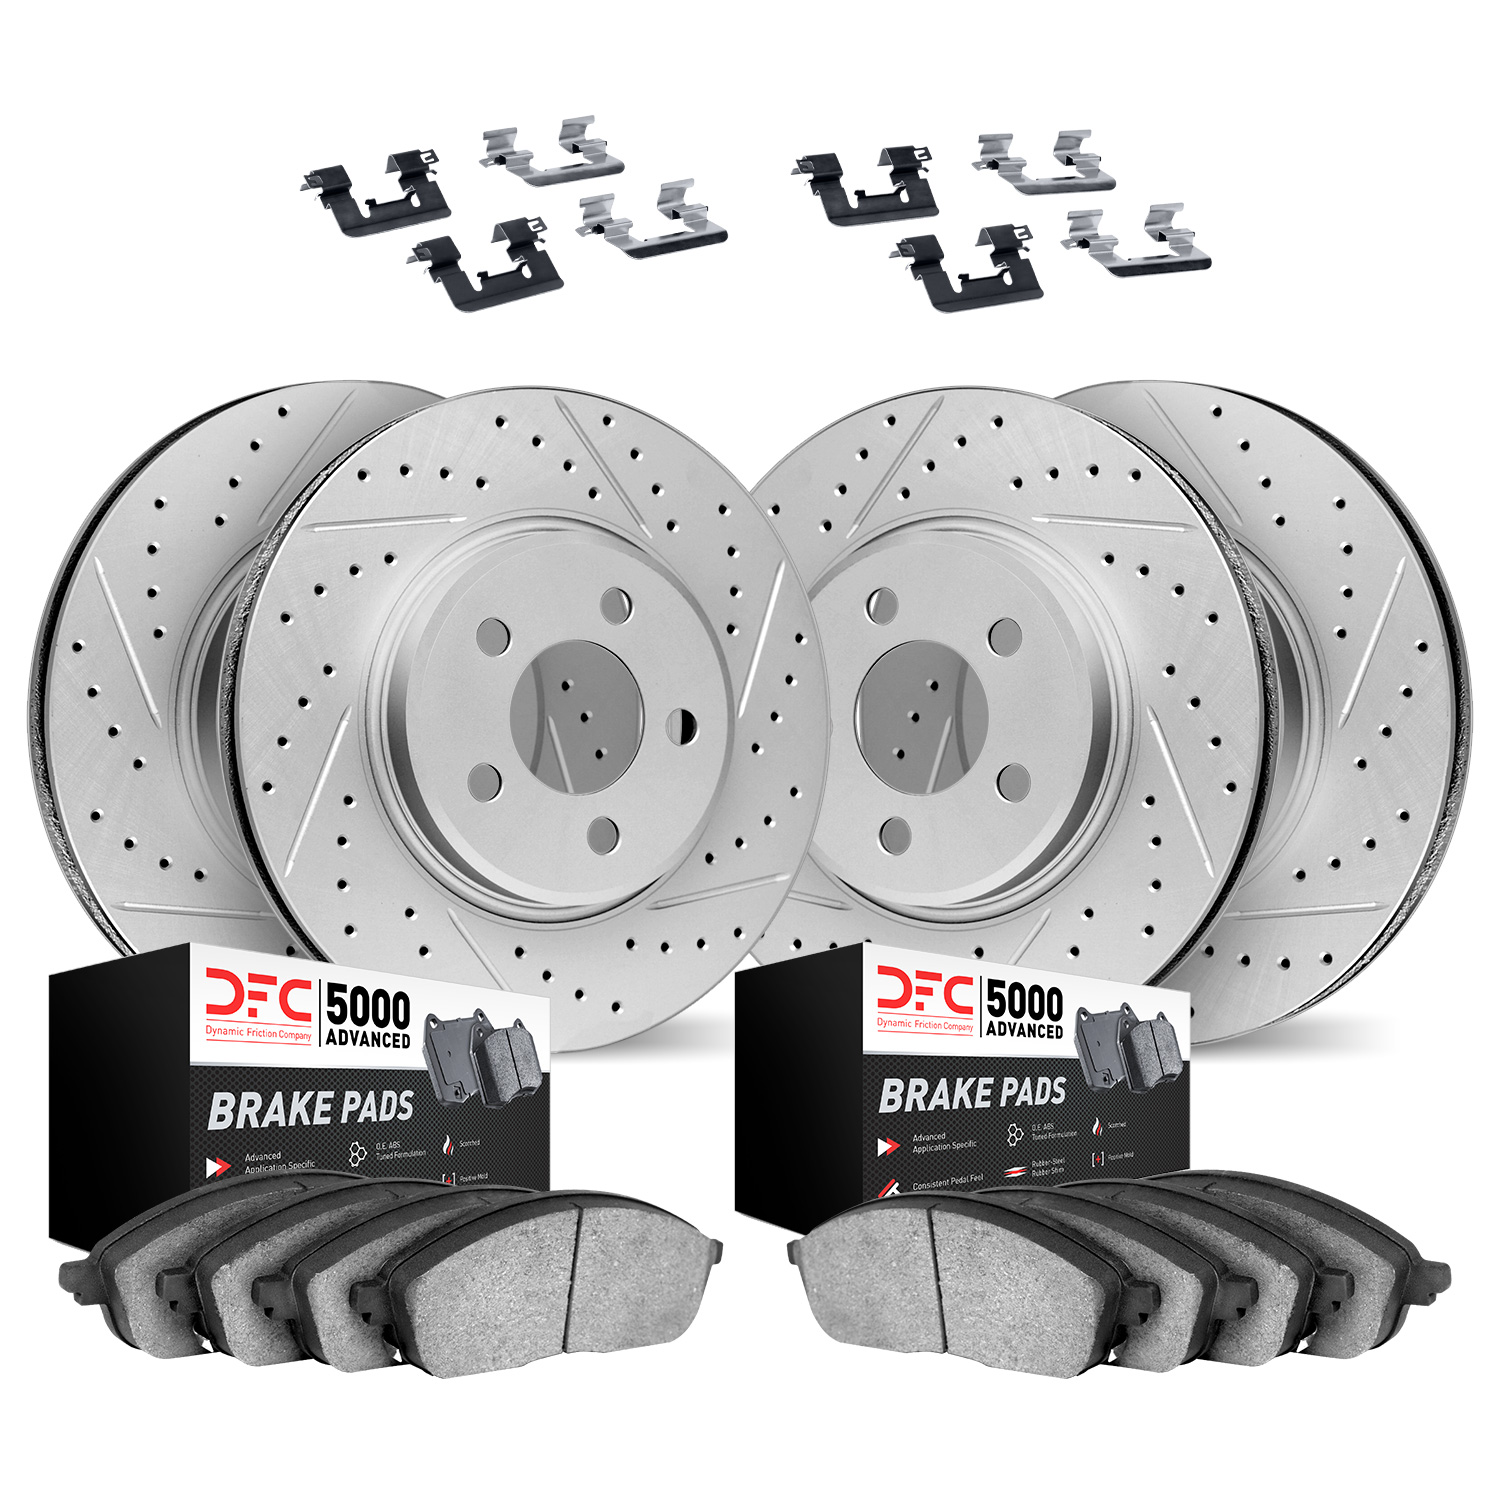 2514-13014 Geoperformance Drilled/Slotted Rotors w/5000 Advanced Brake Pads Kit & Hardware, 2016-2019 Subaru, Position: Front an